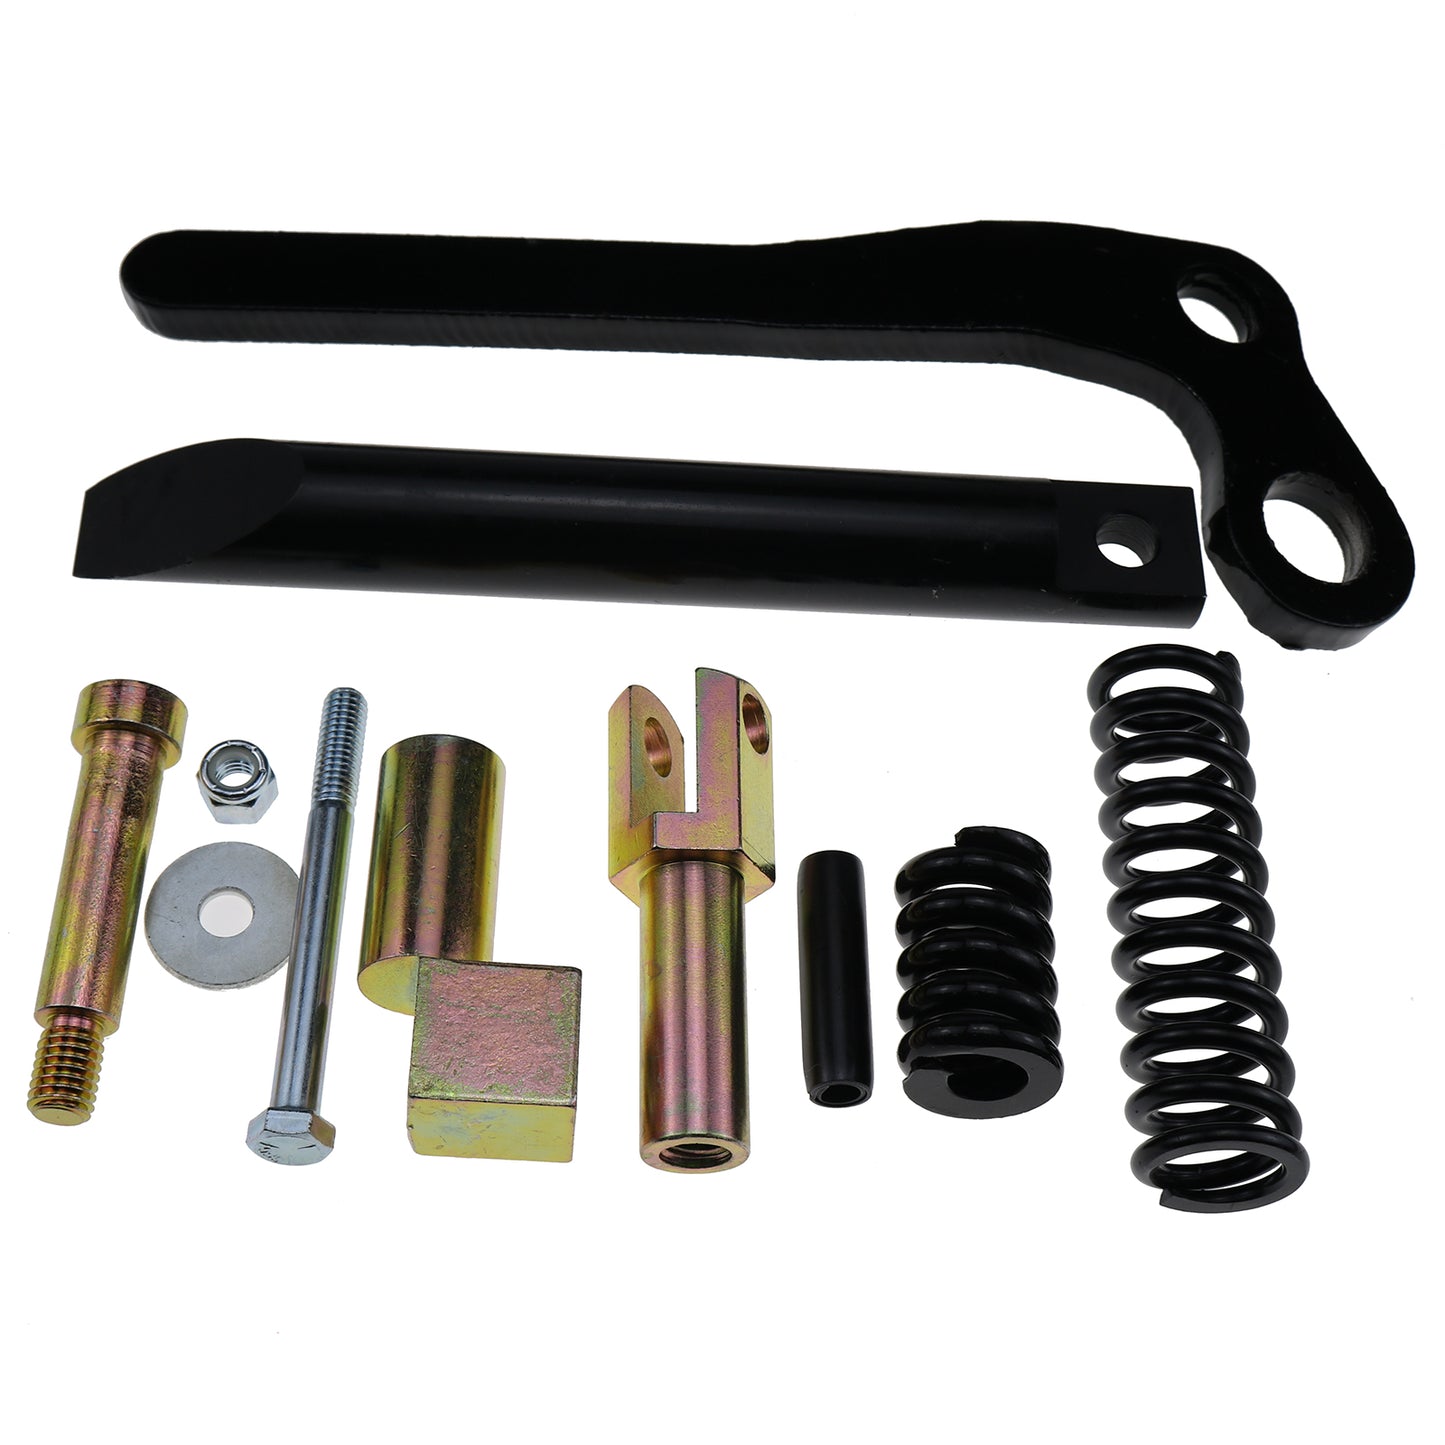 New Bob-Tach LH & RH Lever Kit 6724775 6724776 Compatible with Bobcat Skid Steer 751 753 763 773 7753 863 873 S100 S130 S150 S160 S175 S185 S220 S250 S300 S330 A220 A300 T110 T140 T180 T190 T200 T250